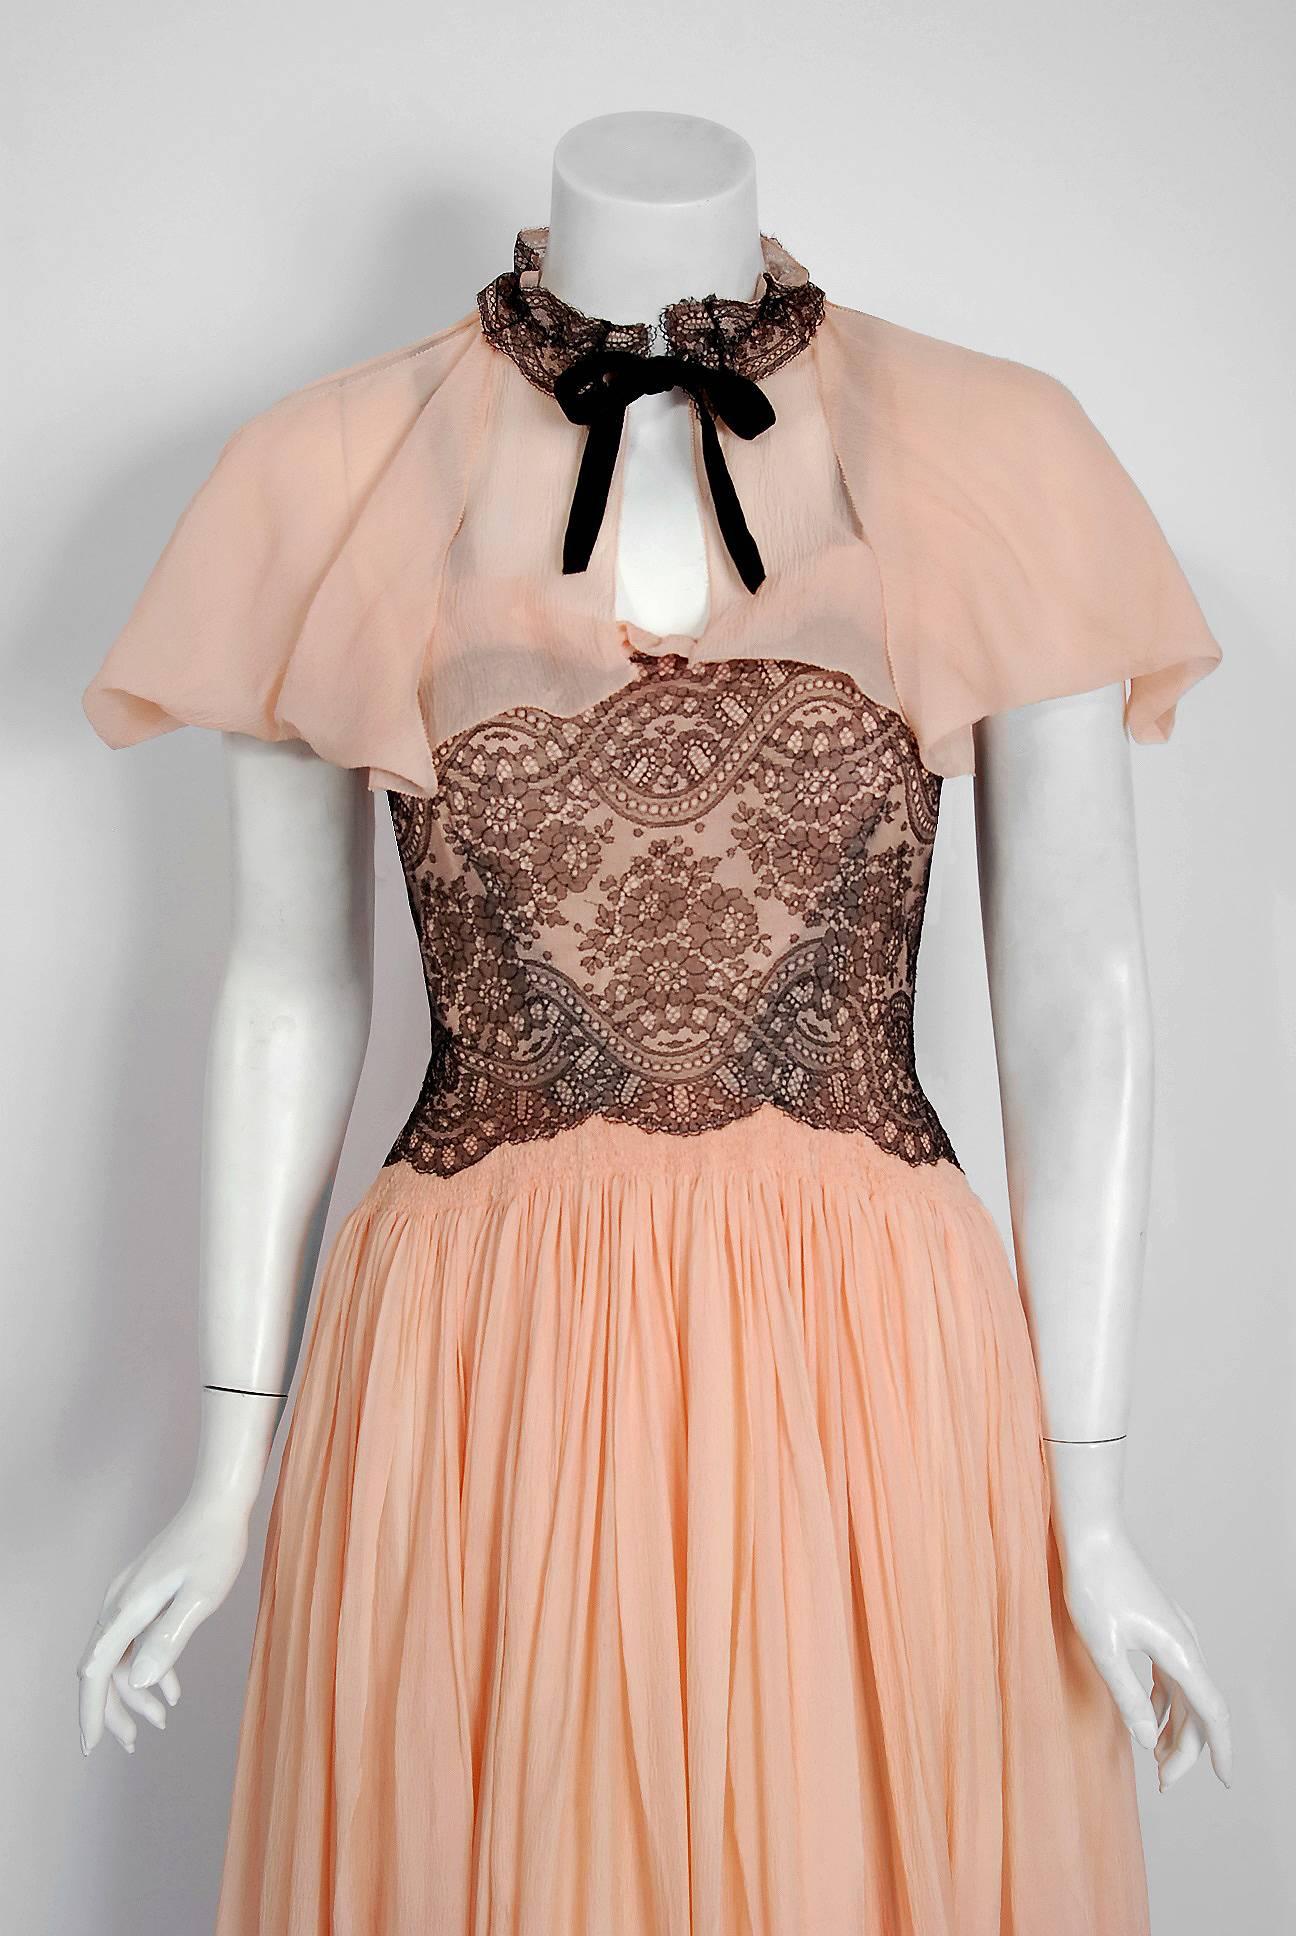 The breathtaking 1940's light pink silk-chiffon and black chantilly-lace used for this French couture ensemble has an ethereal quality that I find irresistible. The boned bodice has elegant ruffle trim with smocked scalloped shaping. From such